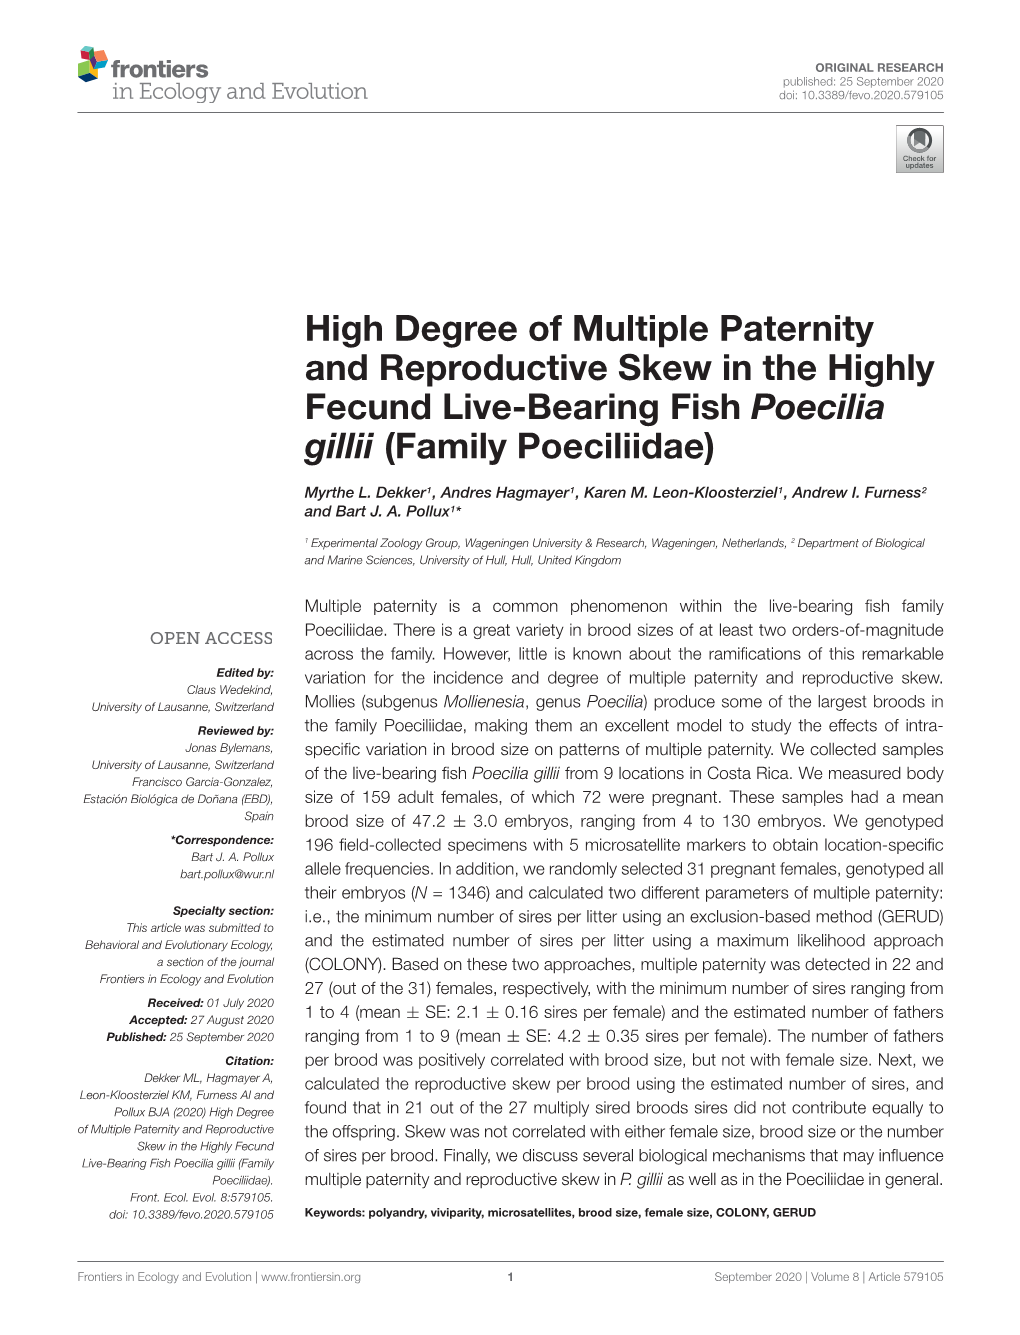 High Degree of Multiple Paternity and Reproductive Skew in the Highly Fecund Live-Bearing Fish Poecilia Gillii (Family Poeciliidae)